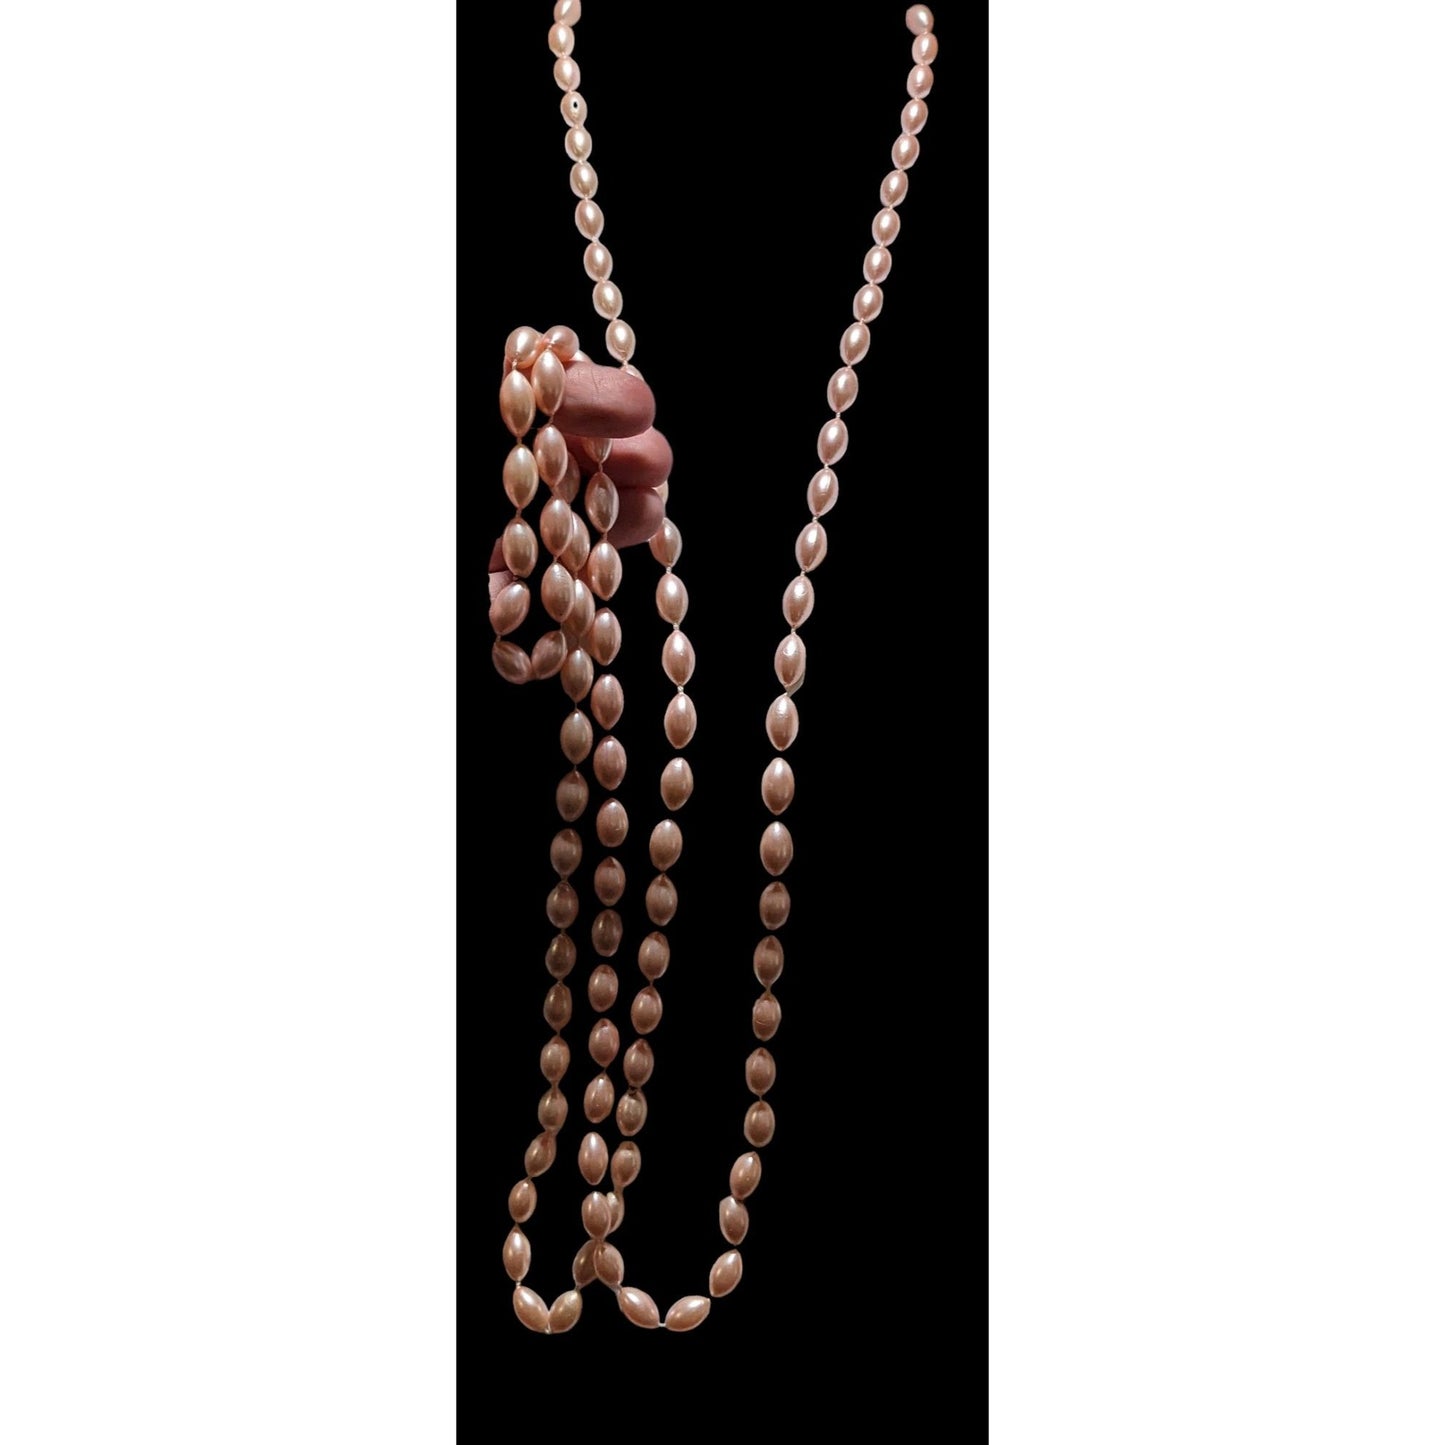 Vintage Pink Faux Pearl Necklace